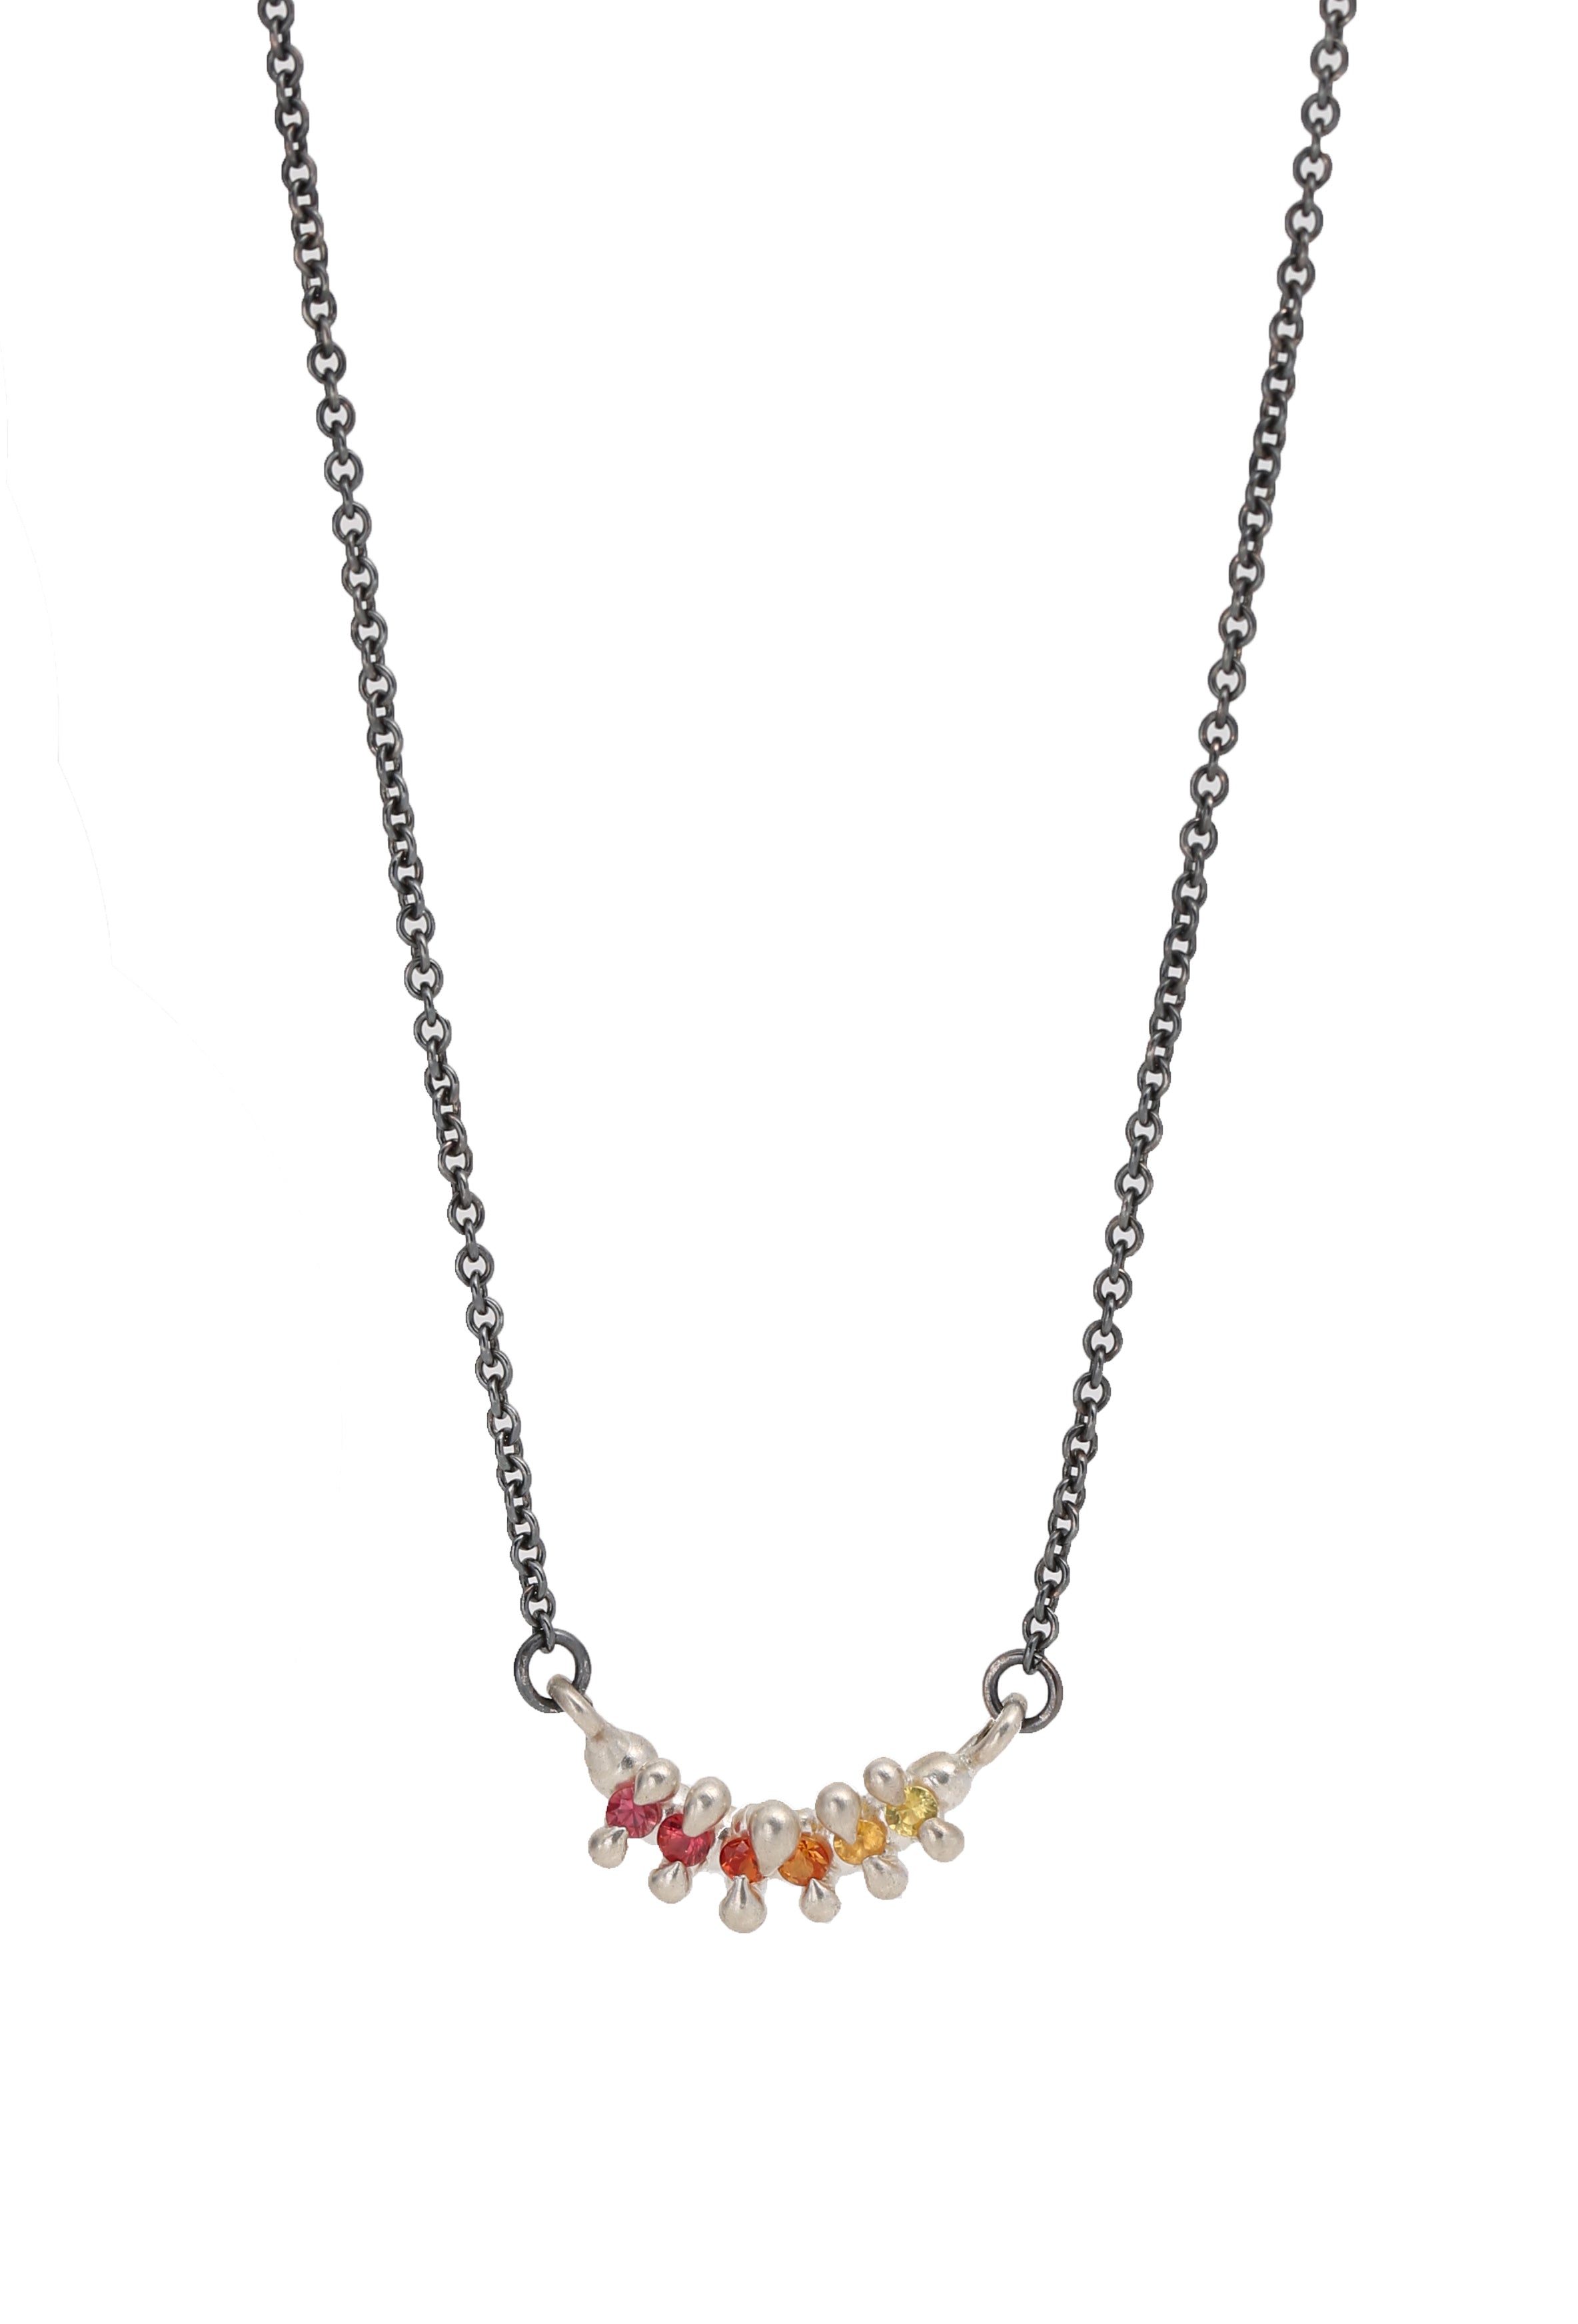 Limited Edition 6 Stone Bar Necklace Ombré Sapphires